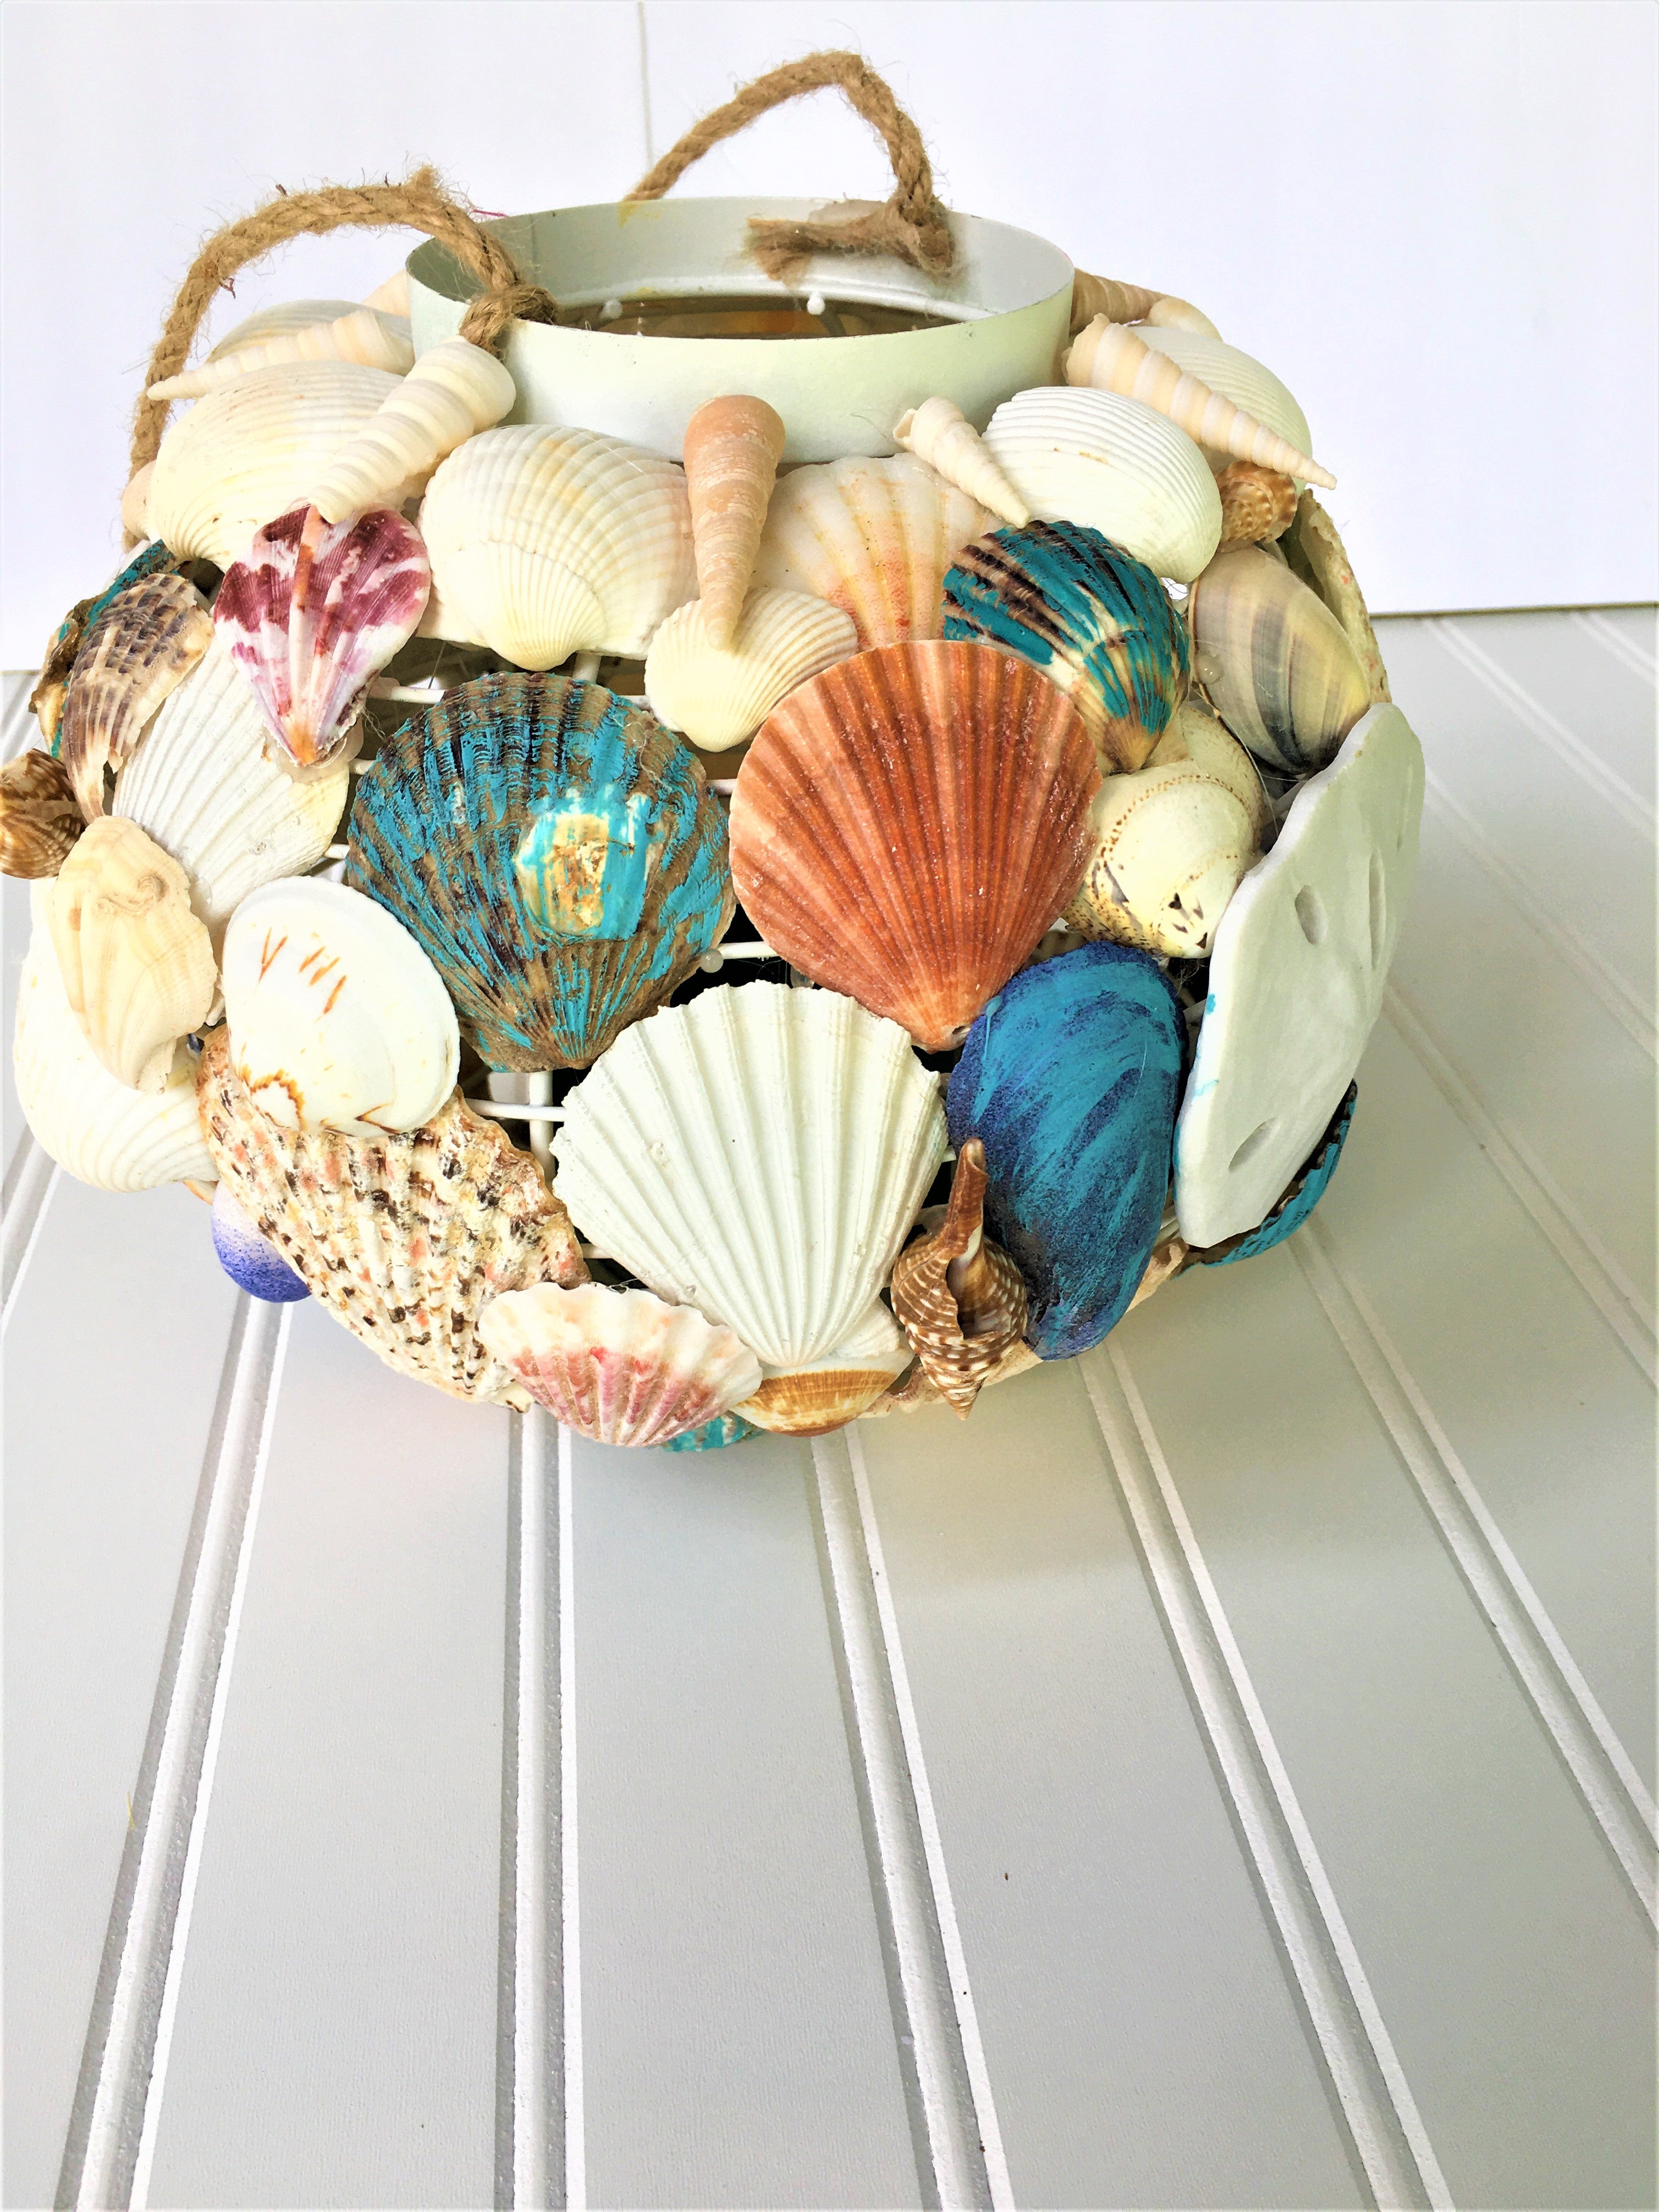 Ocean's Gift Sea Shell Candle holder  8" x 4"